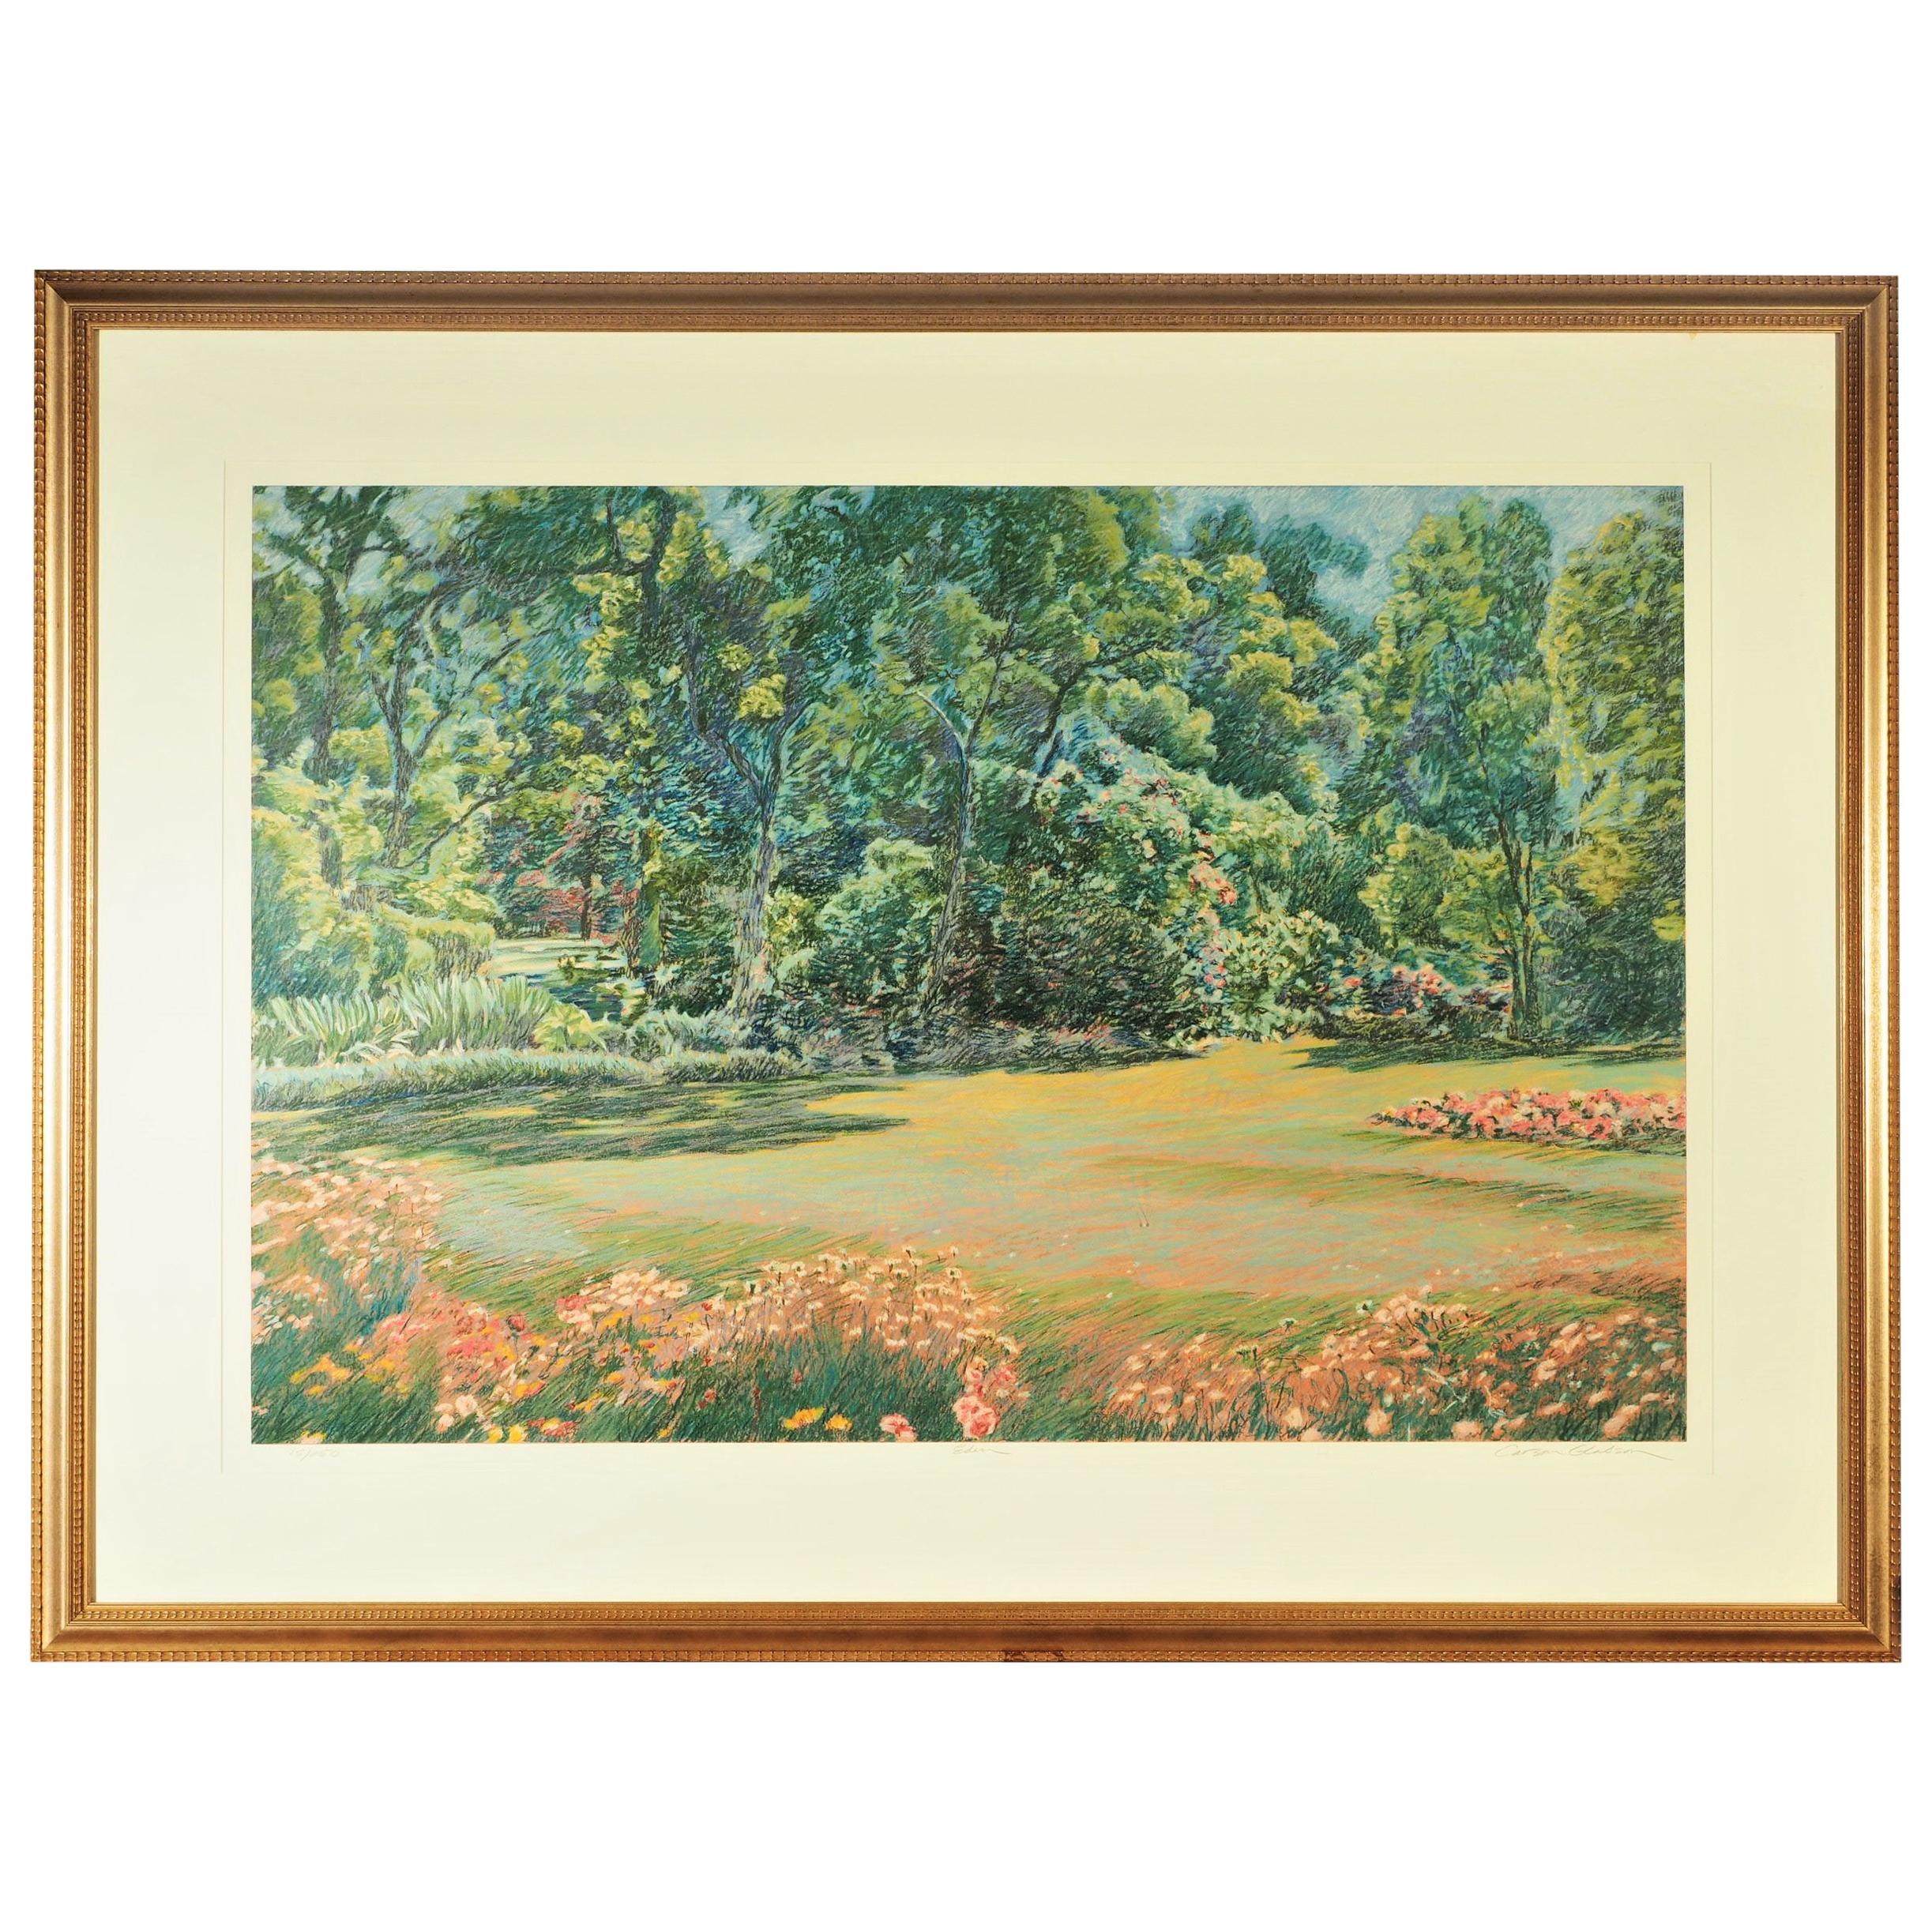 Wall-Sized Carson Gladson Signed and Numbered Lithograph, "Eden"